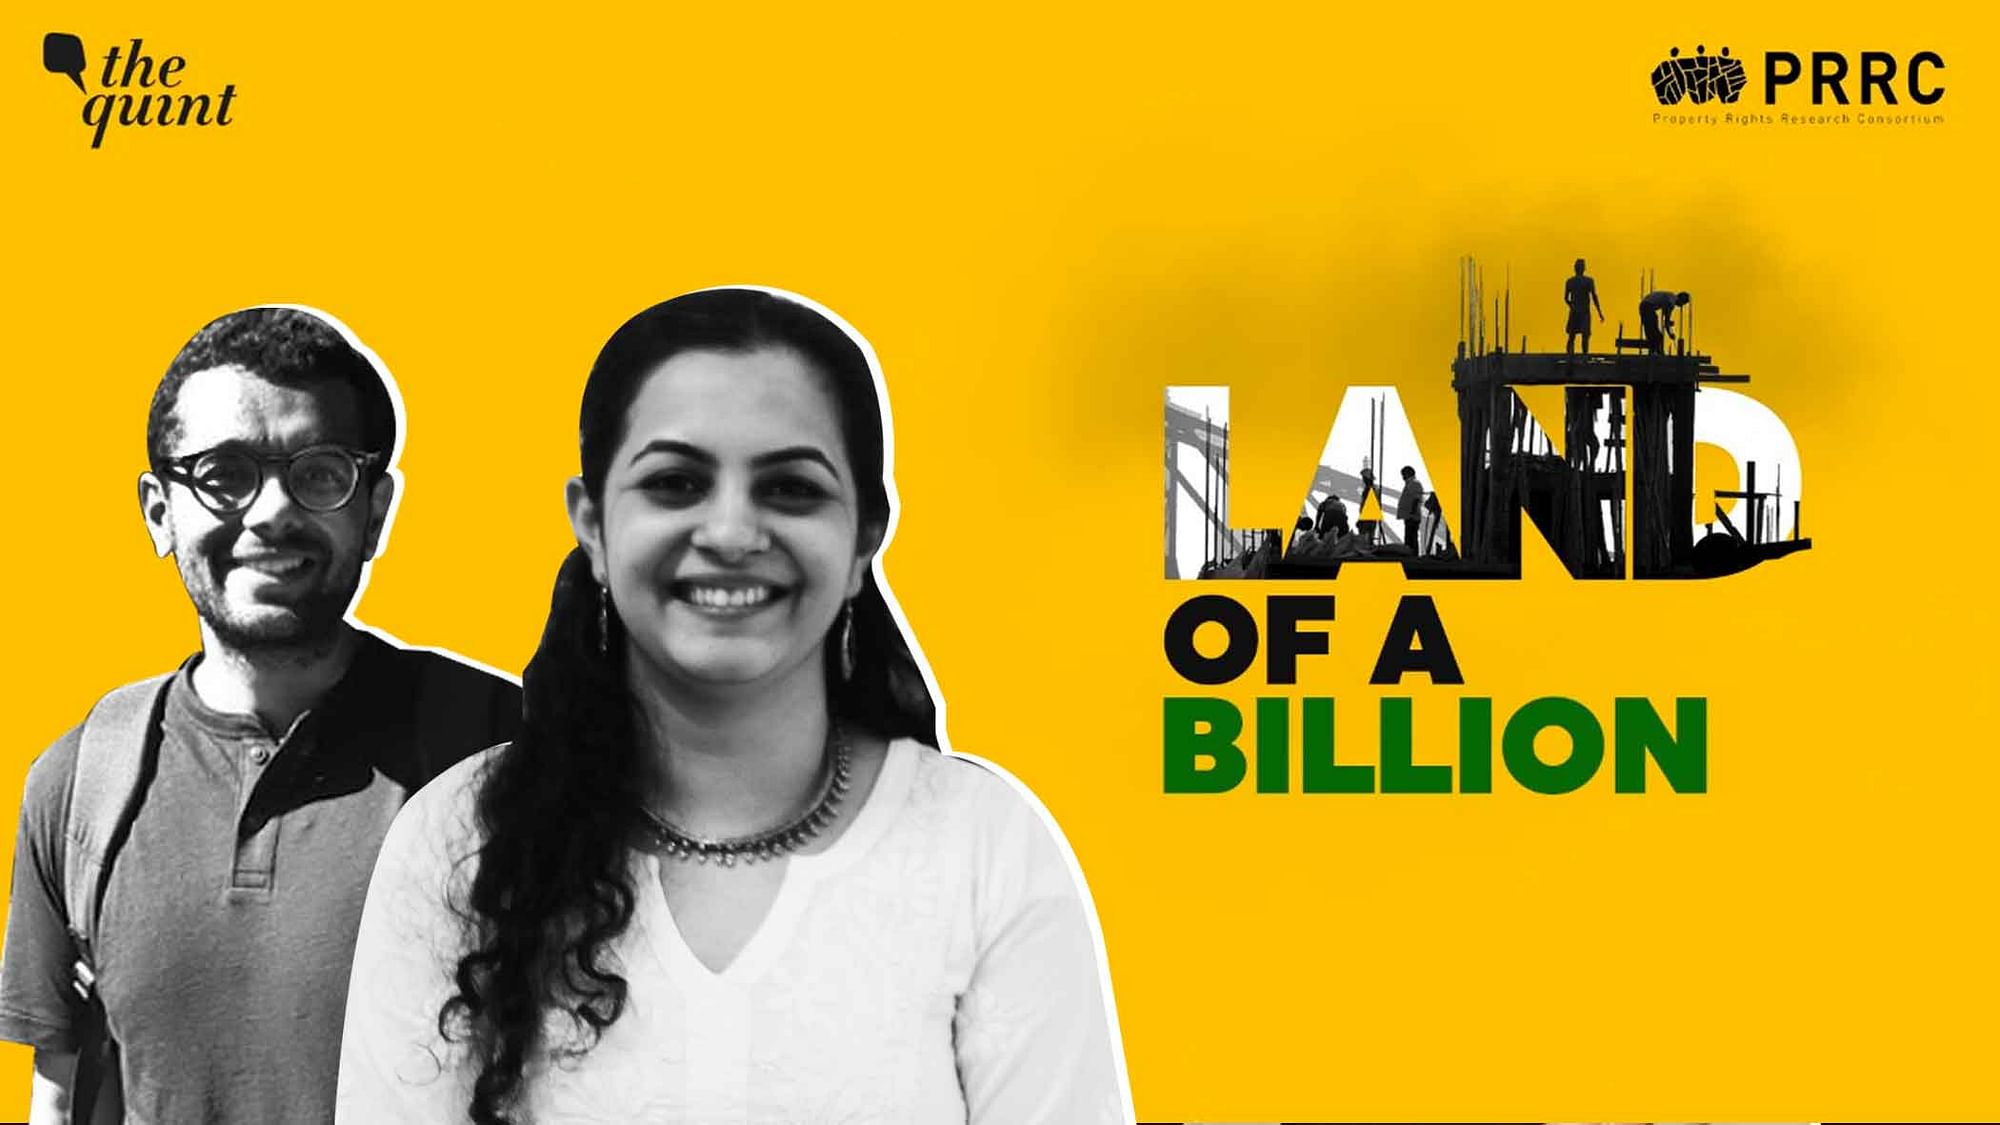 In Episode 7 of ‘Land of a Billion’ podcast, independent researchers Sahil Gandhi (left) and Vaideshi Tandel (right) unpack  housing paradoxes in our cities.